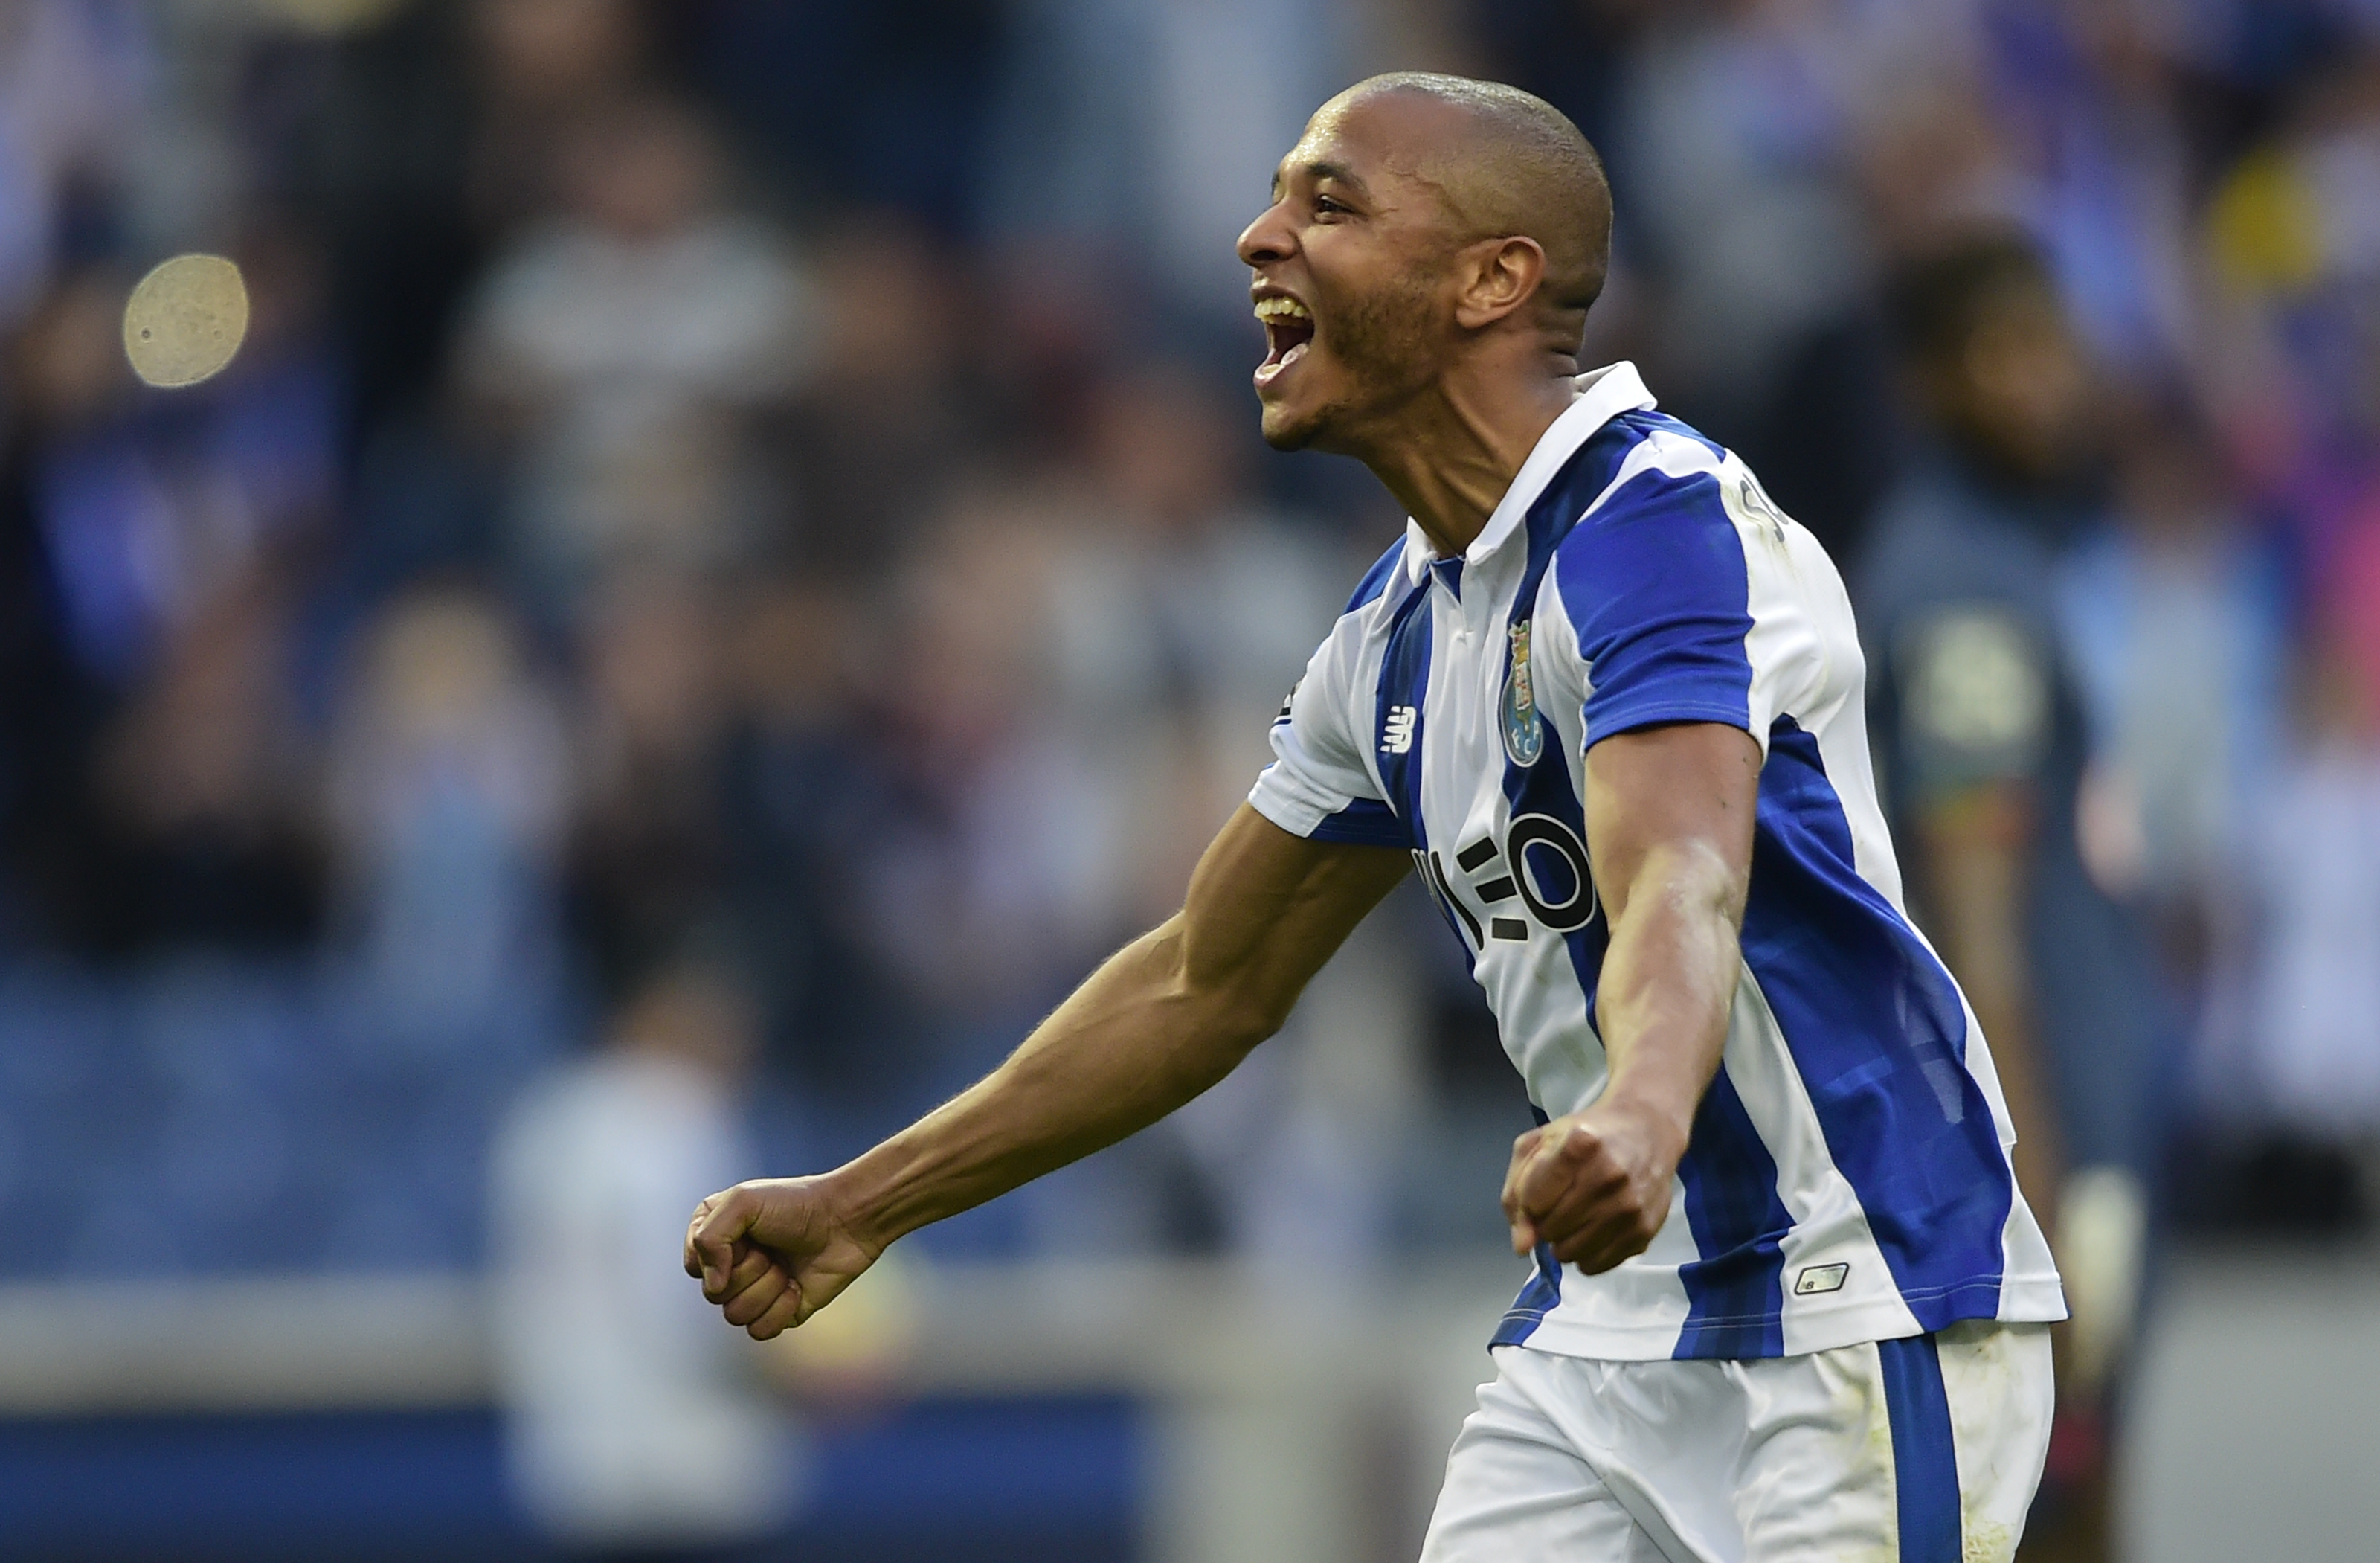 Porto's Algerian forward Yacine Brahimi celebrates after scoring a goal during the Portuguese league football match FC Porto vs Belenenses at the Dragao stadium in Porto on April 8, 2017. / AFP PHOTO / MIGUEL RIOPA        (Photo credit should read MIGUEL RIOPA/AFP/Getty Images)